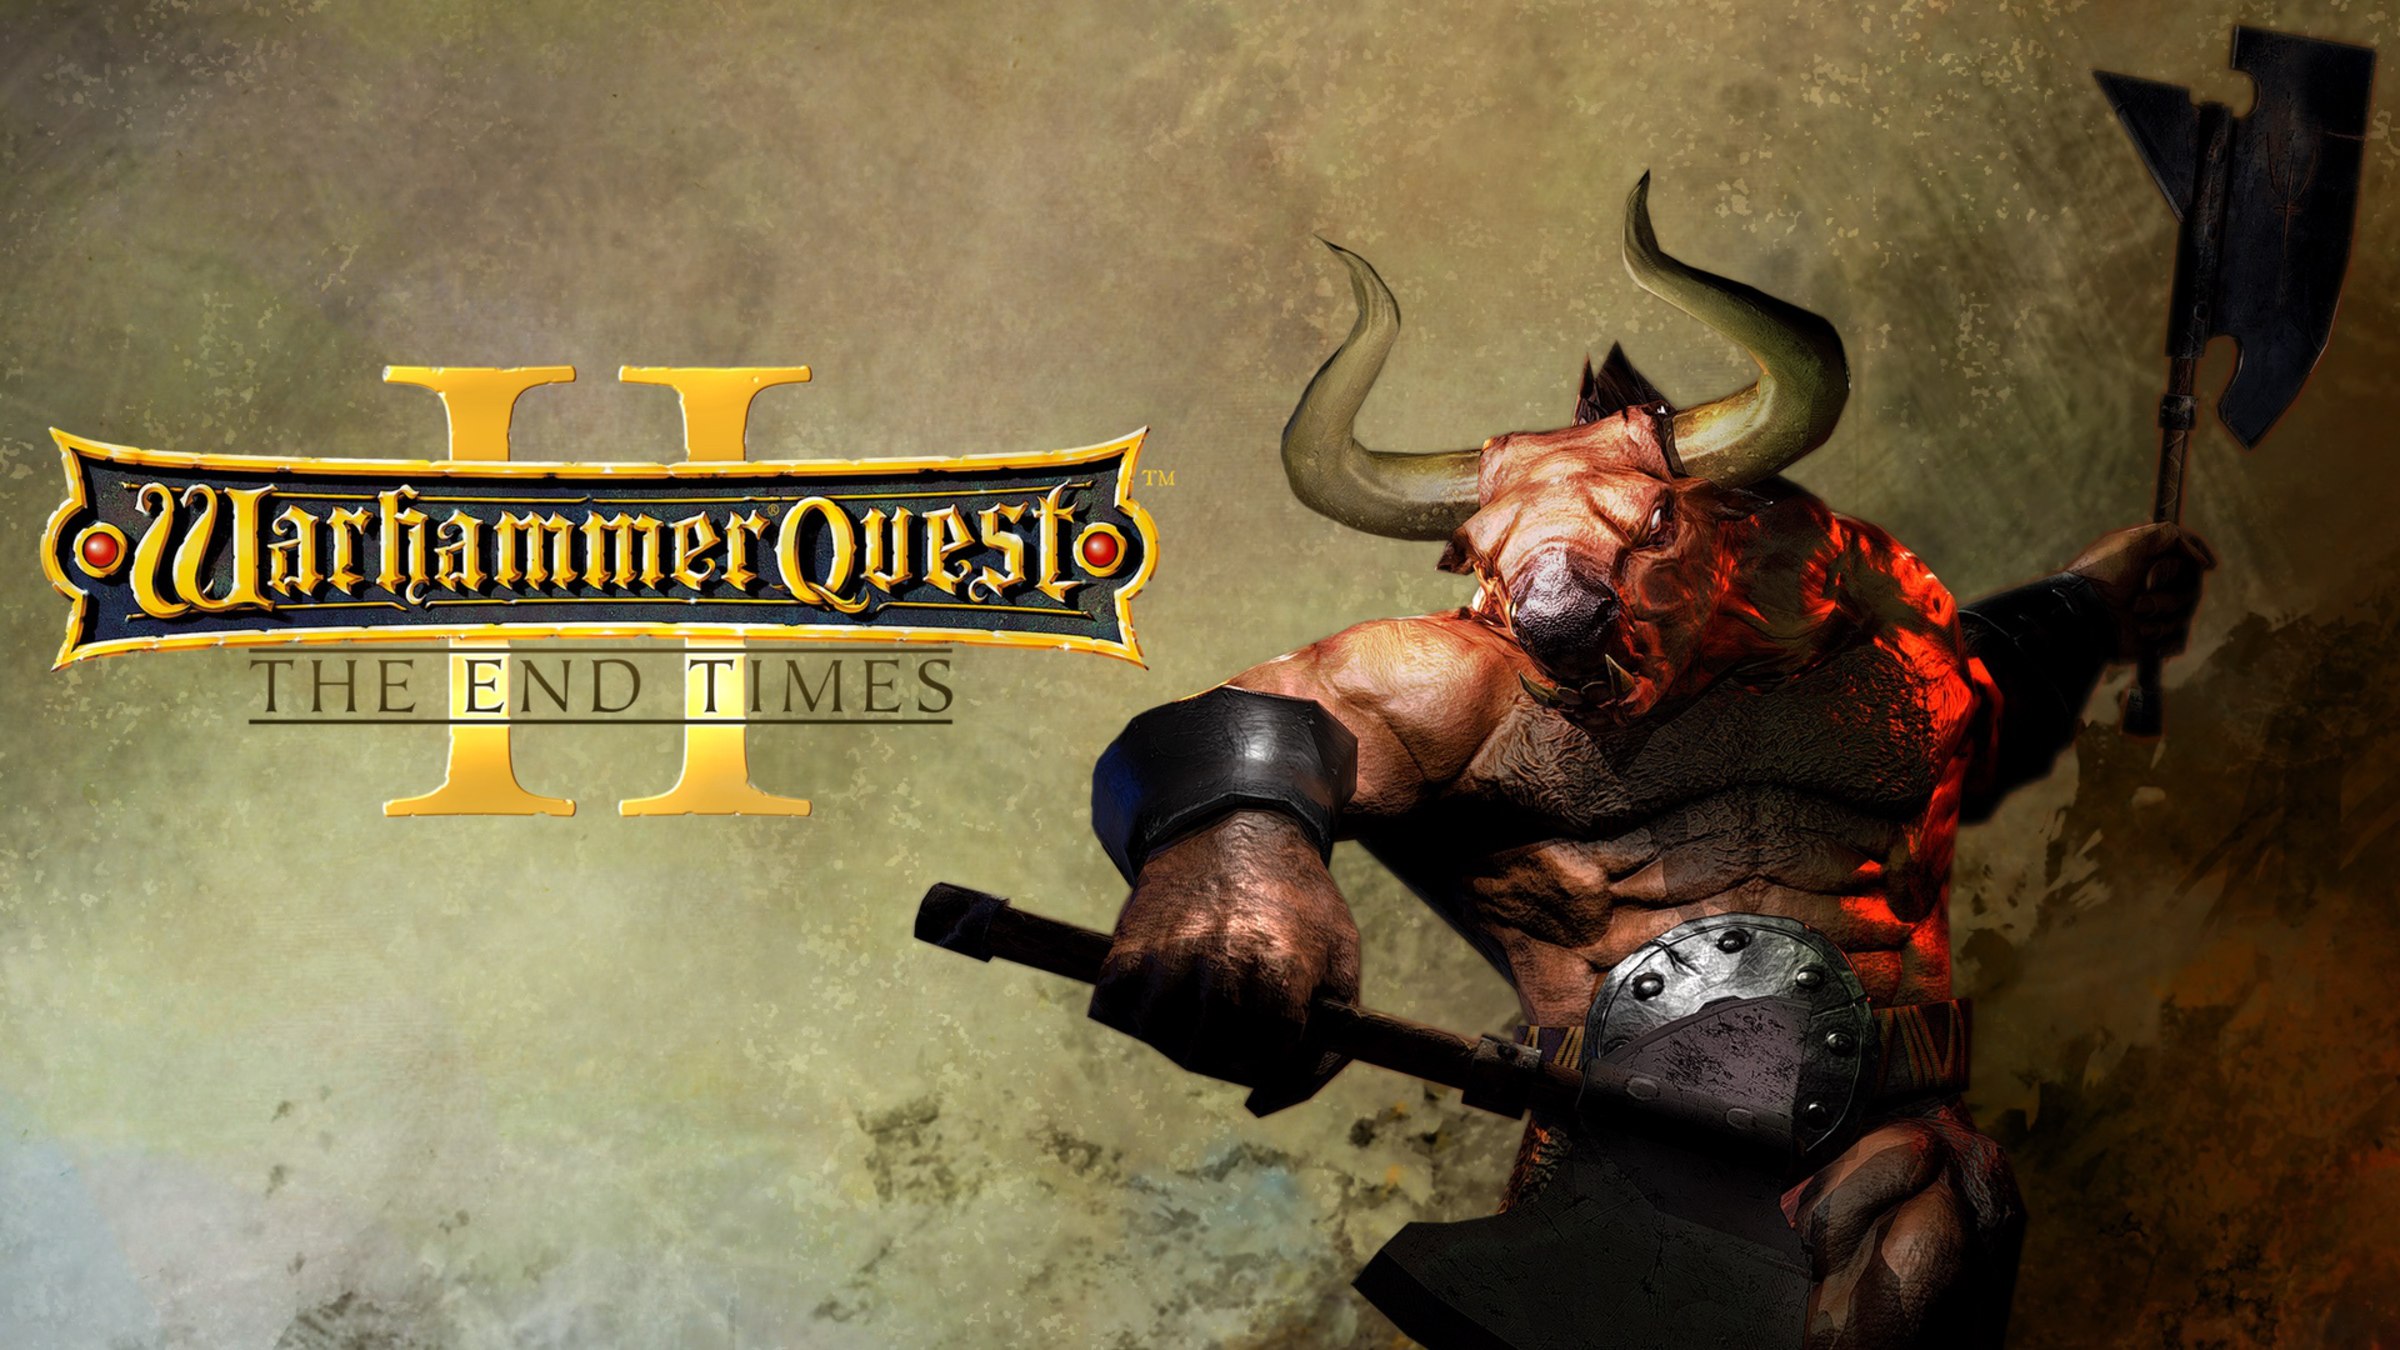 90% Warhammer Quest 2: The End Times on